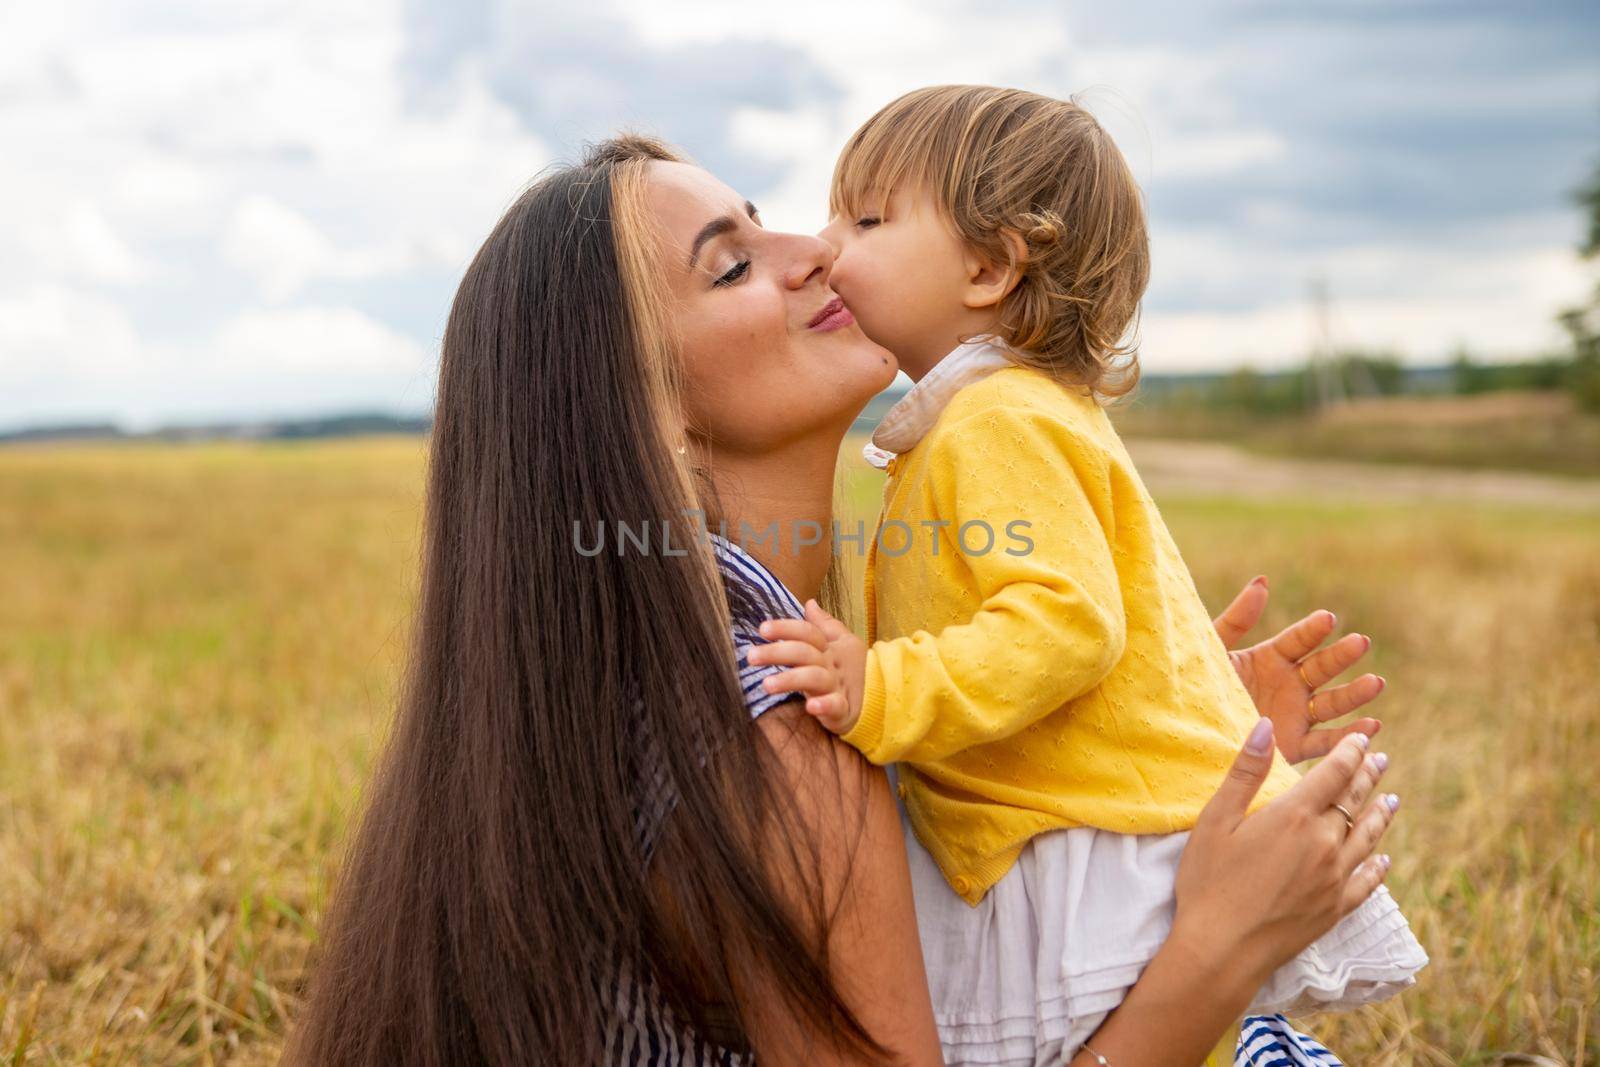 adorable toddler girl kisses her mother on a picnic in the field. by Mariaprovector